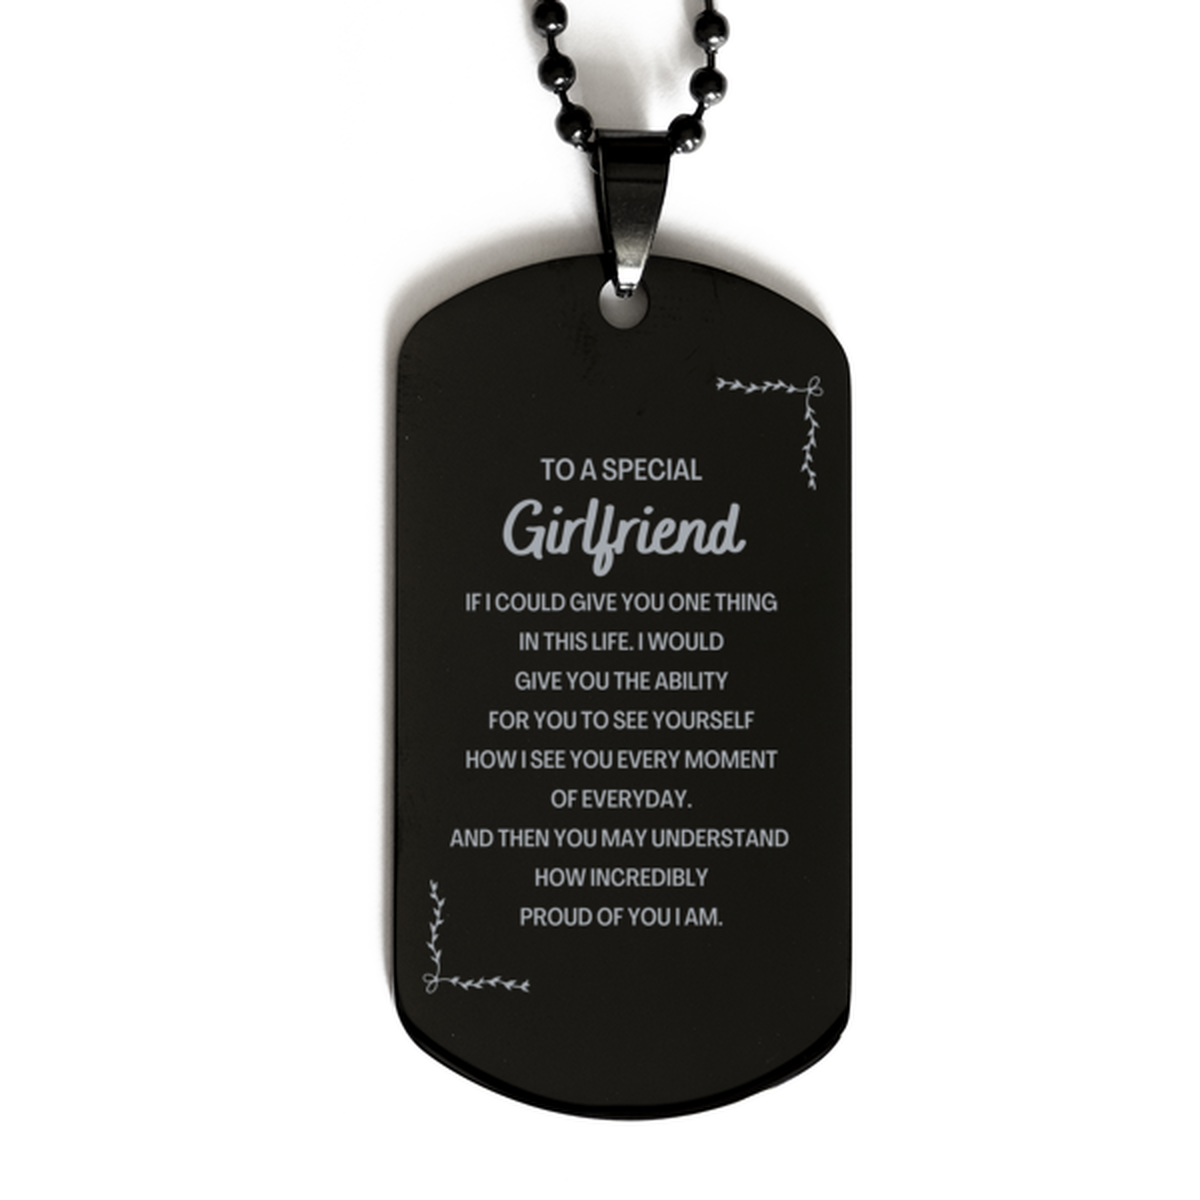 To My Girlfriend Black Dog Tag, Gifts For Girlfriend Engraved, Inspirational Gifts for Christmas Birthday, Epic Gifts for Girlfriend To A Special Girlfriend how incredibly proud of you I am